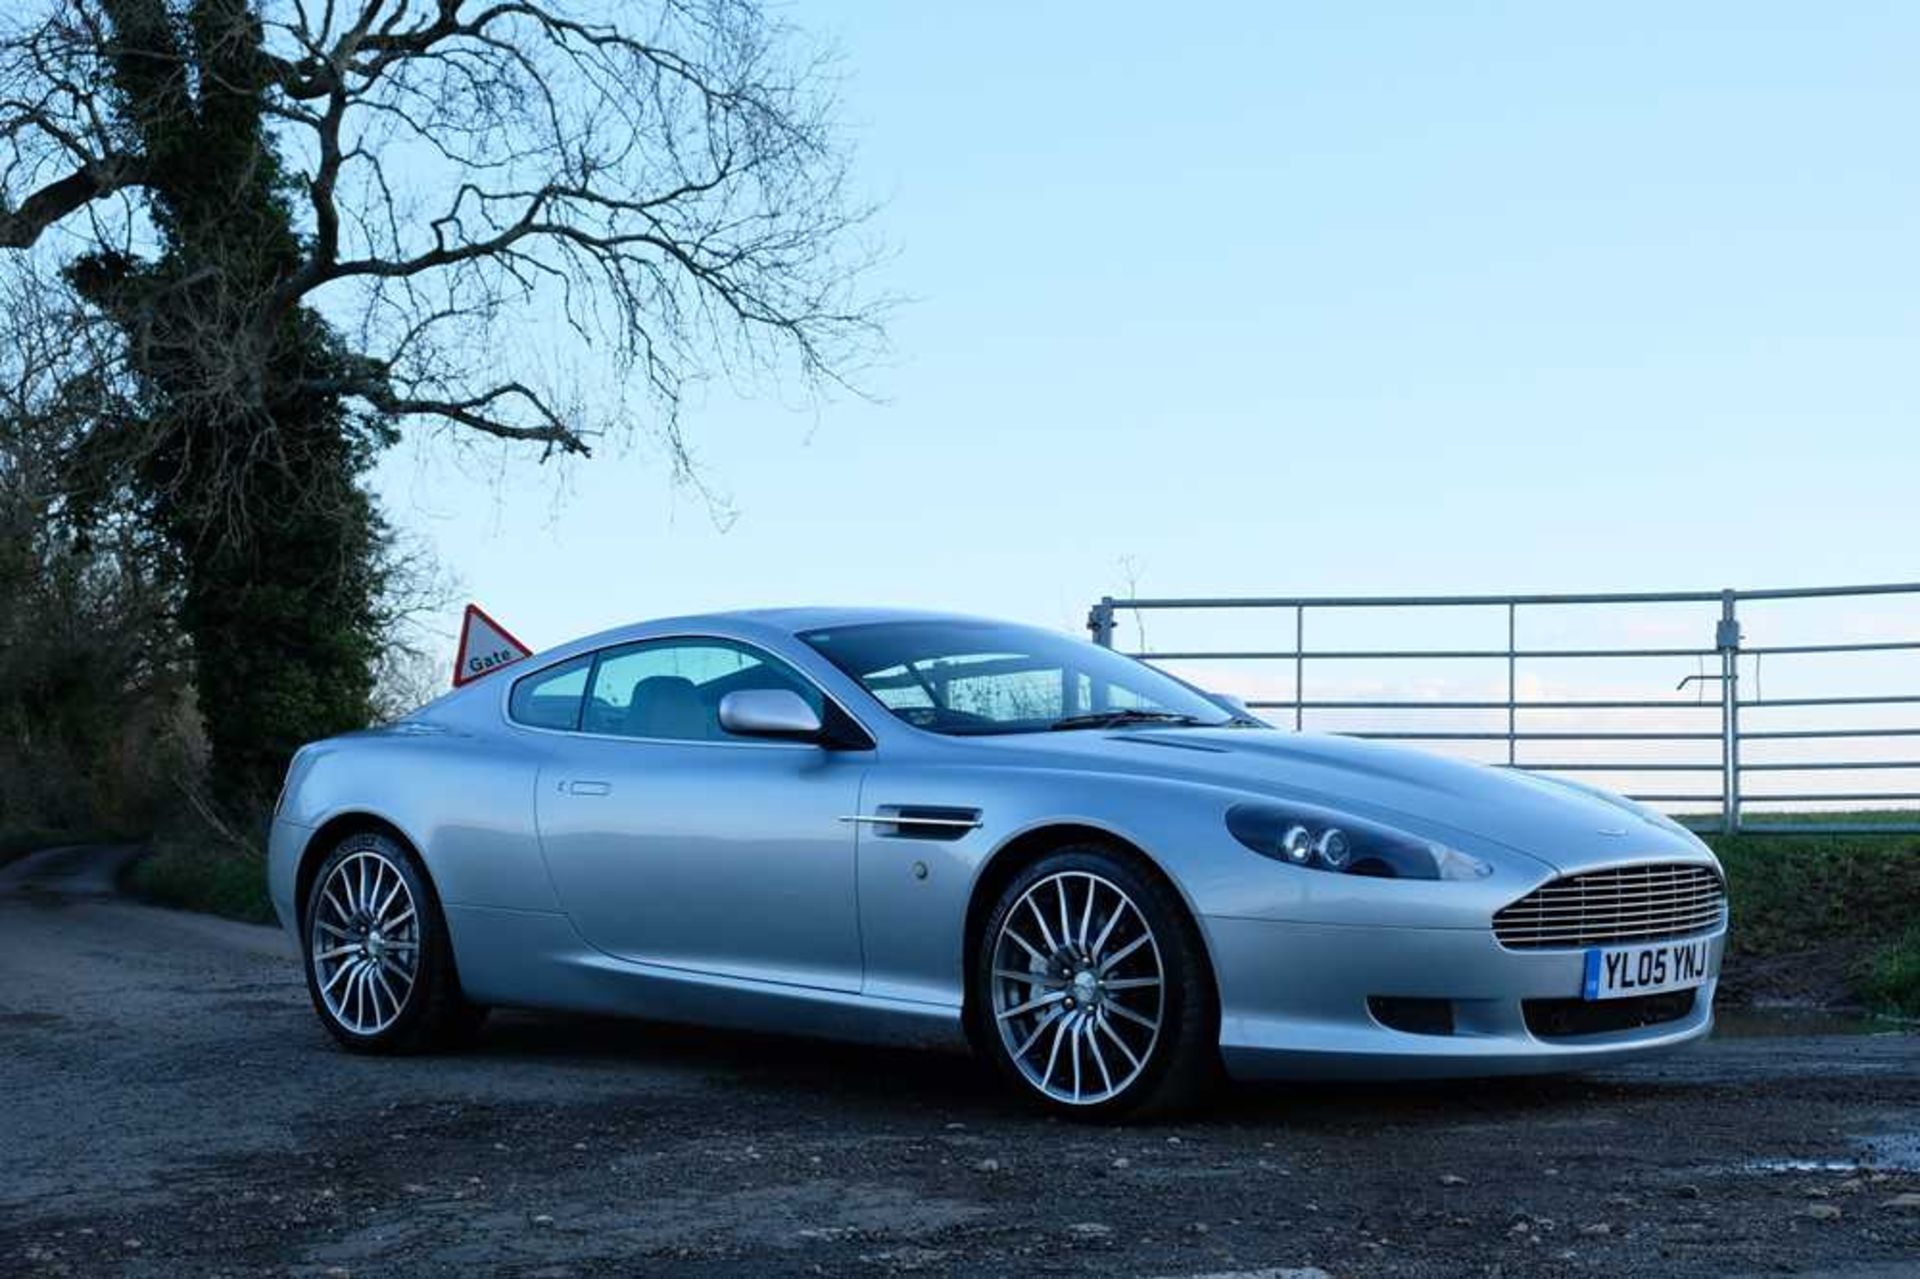 2005 Aston Martin DB9 c.25,000 from new and 4 former keepers - Image 5 of 59